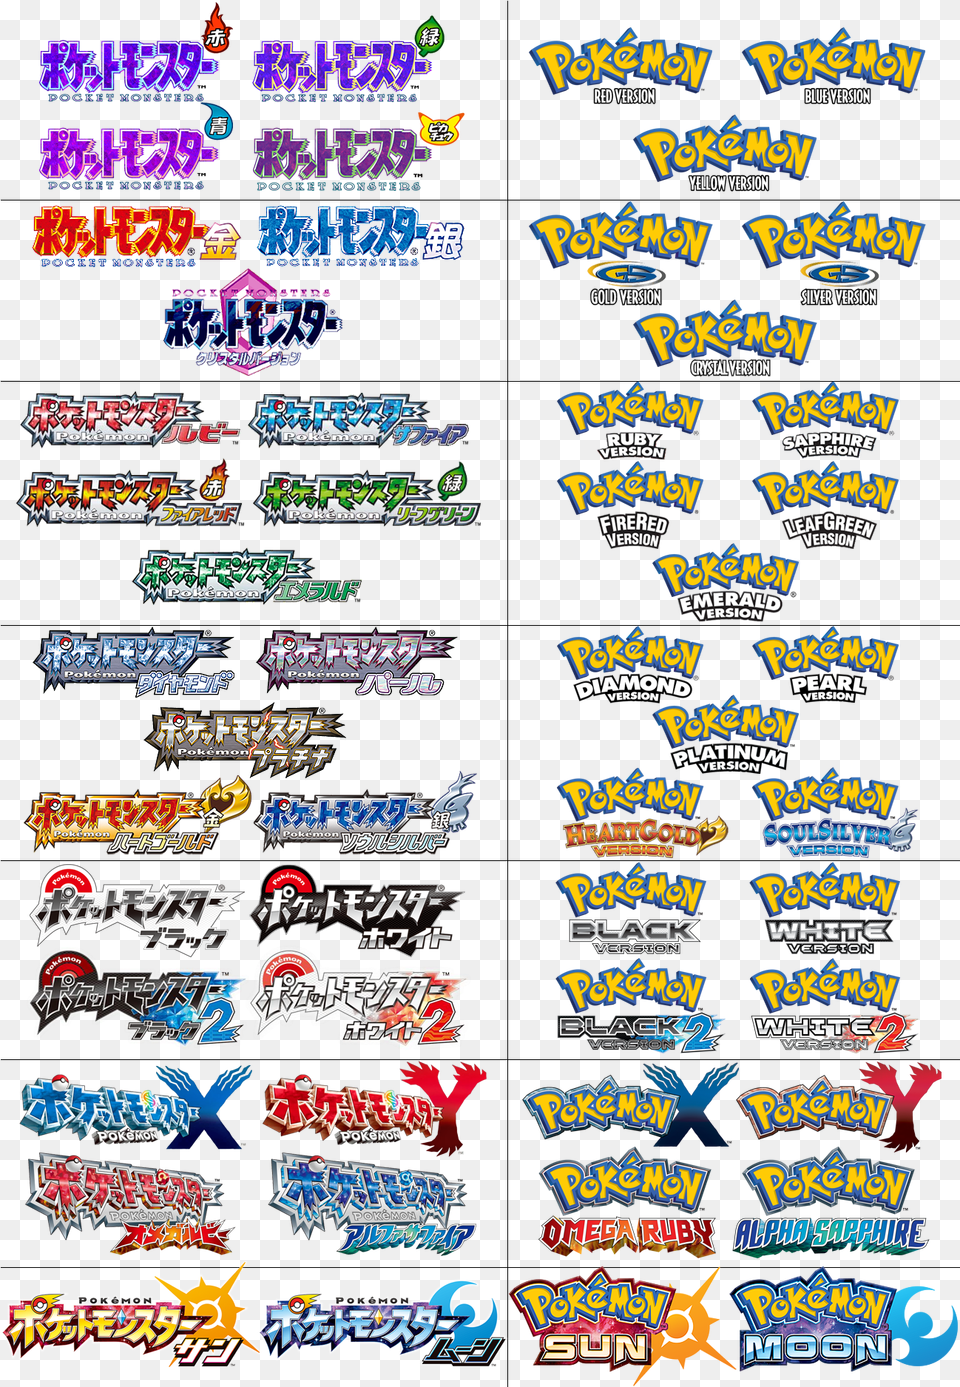 Pokmon Logo Evolution All Pokemon Core Games, Text, Food, Sweets Png Image